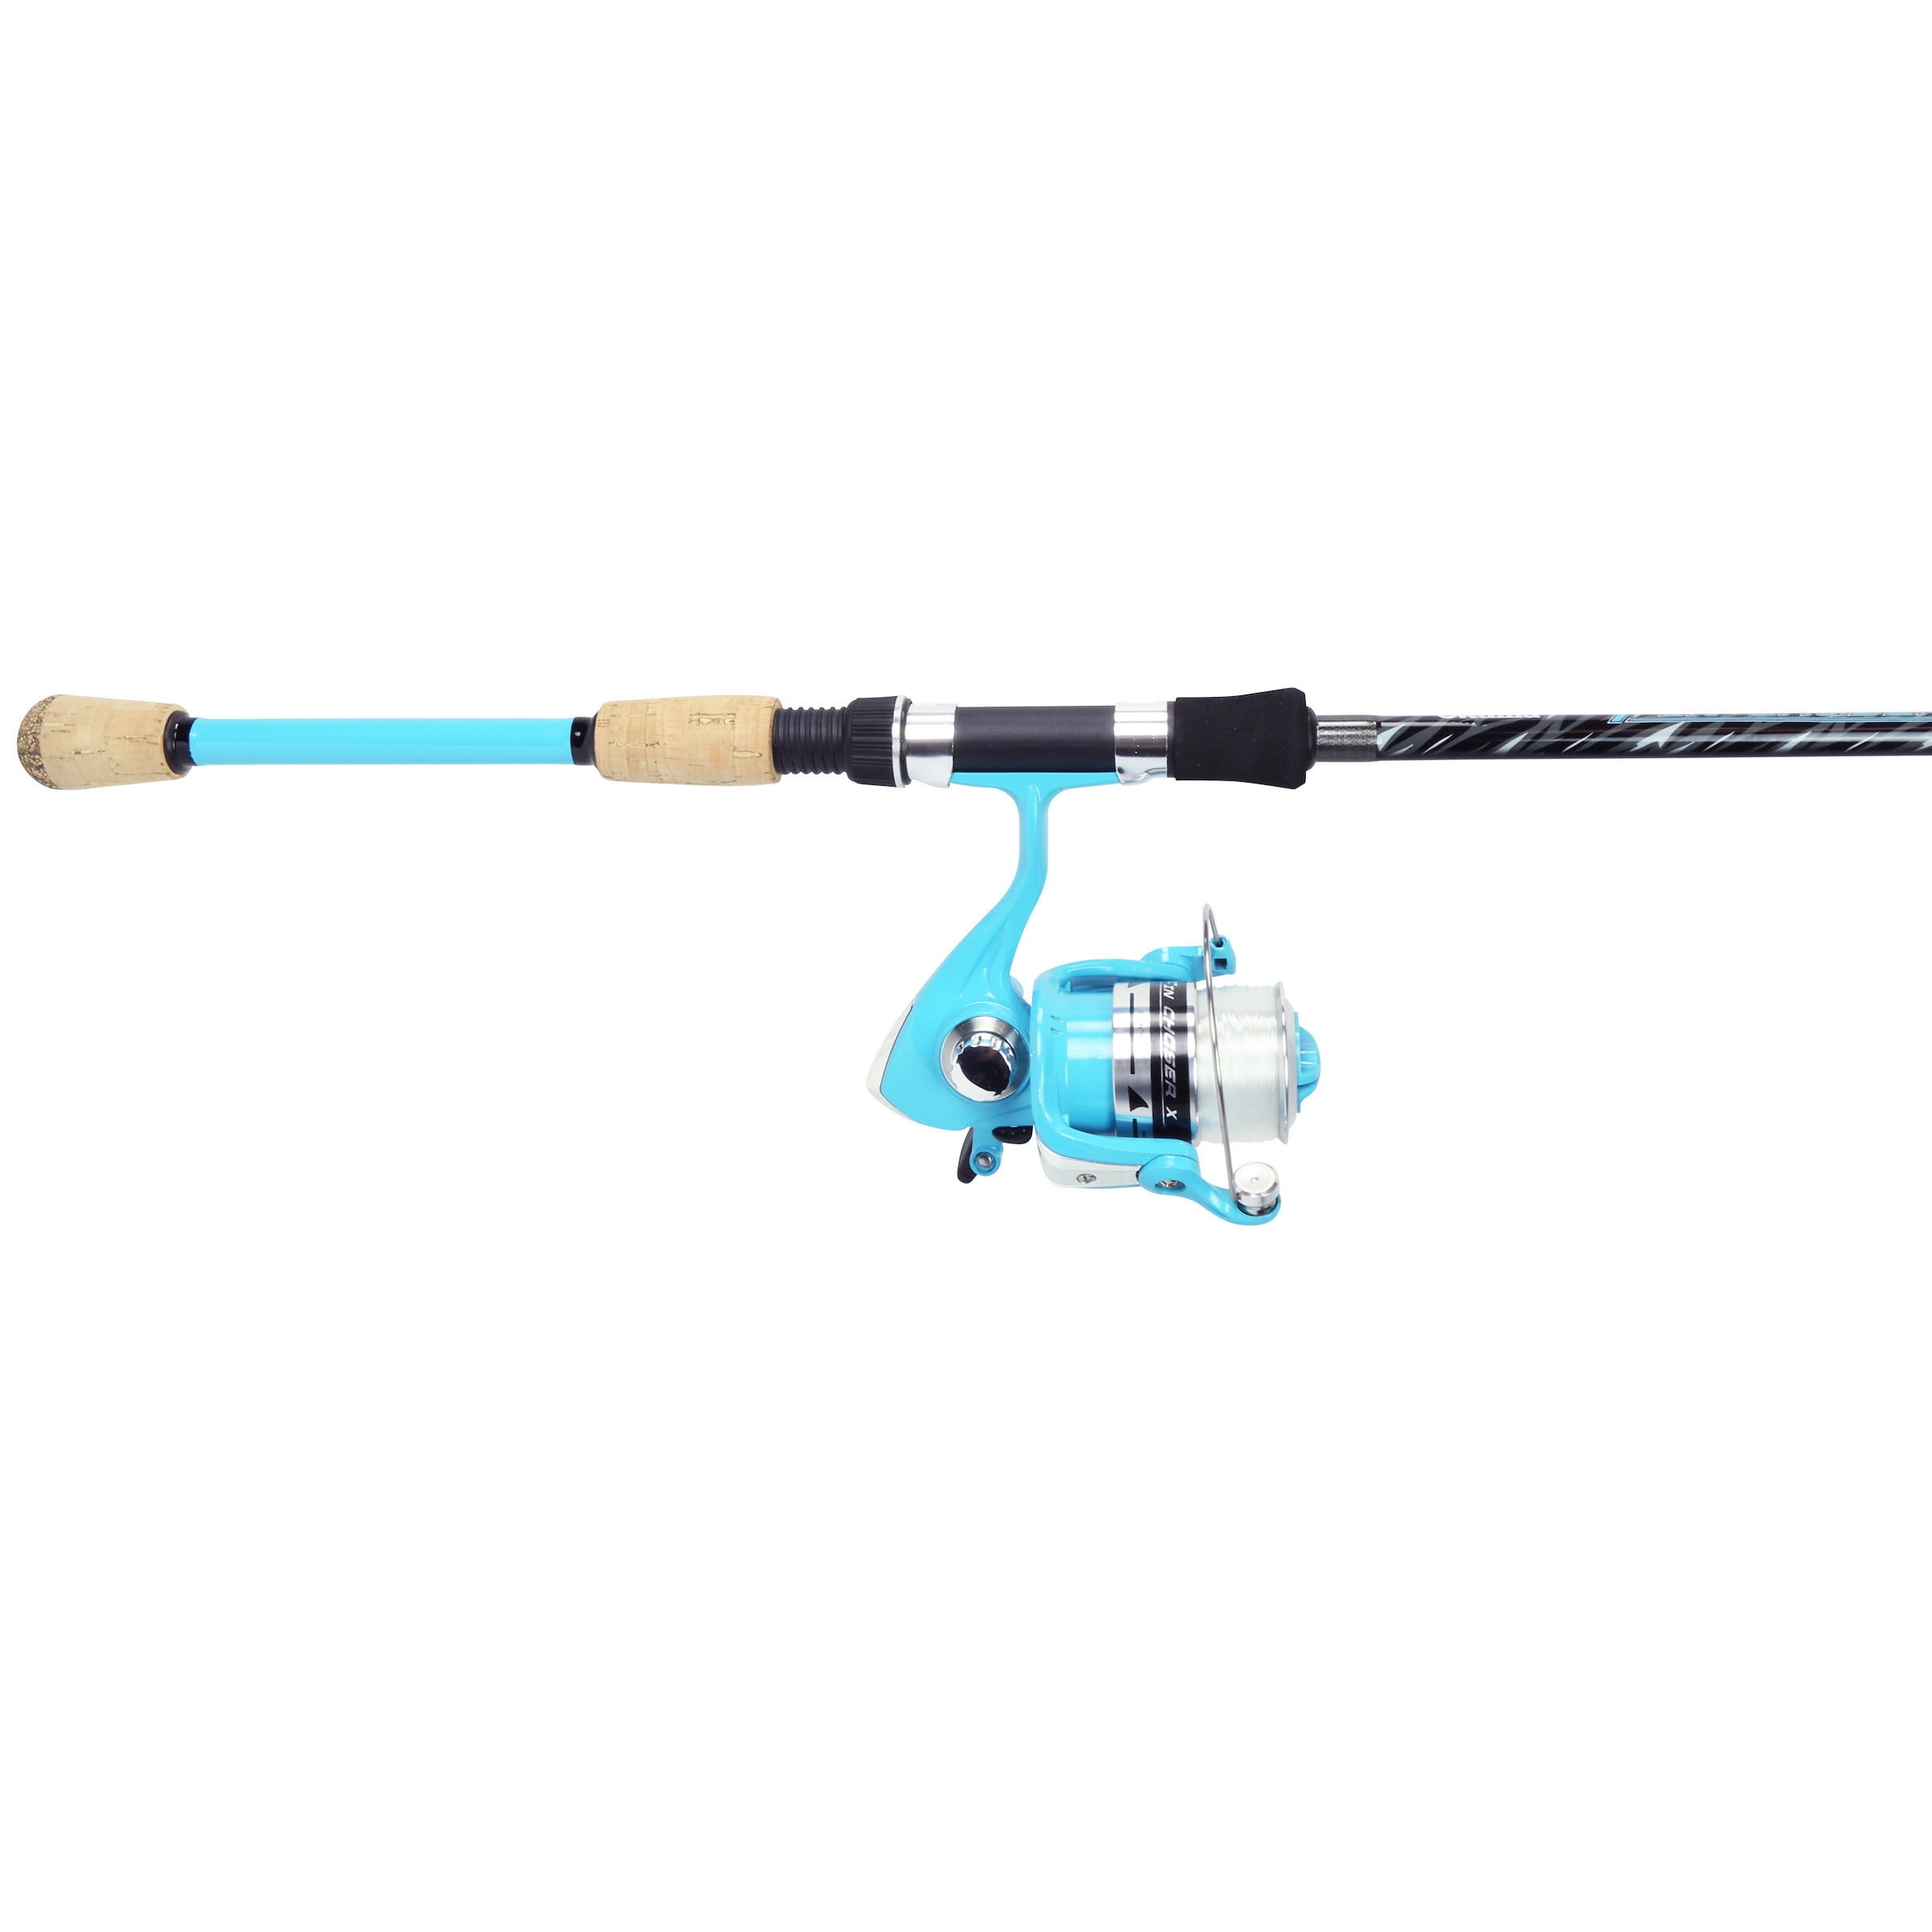 Okuma Fin Chaser x Series Spinning Fishing Rod and Reel Combo, Sea Foam, 7ft